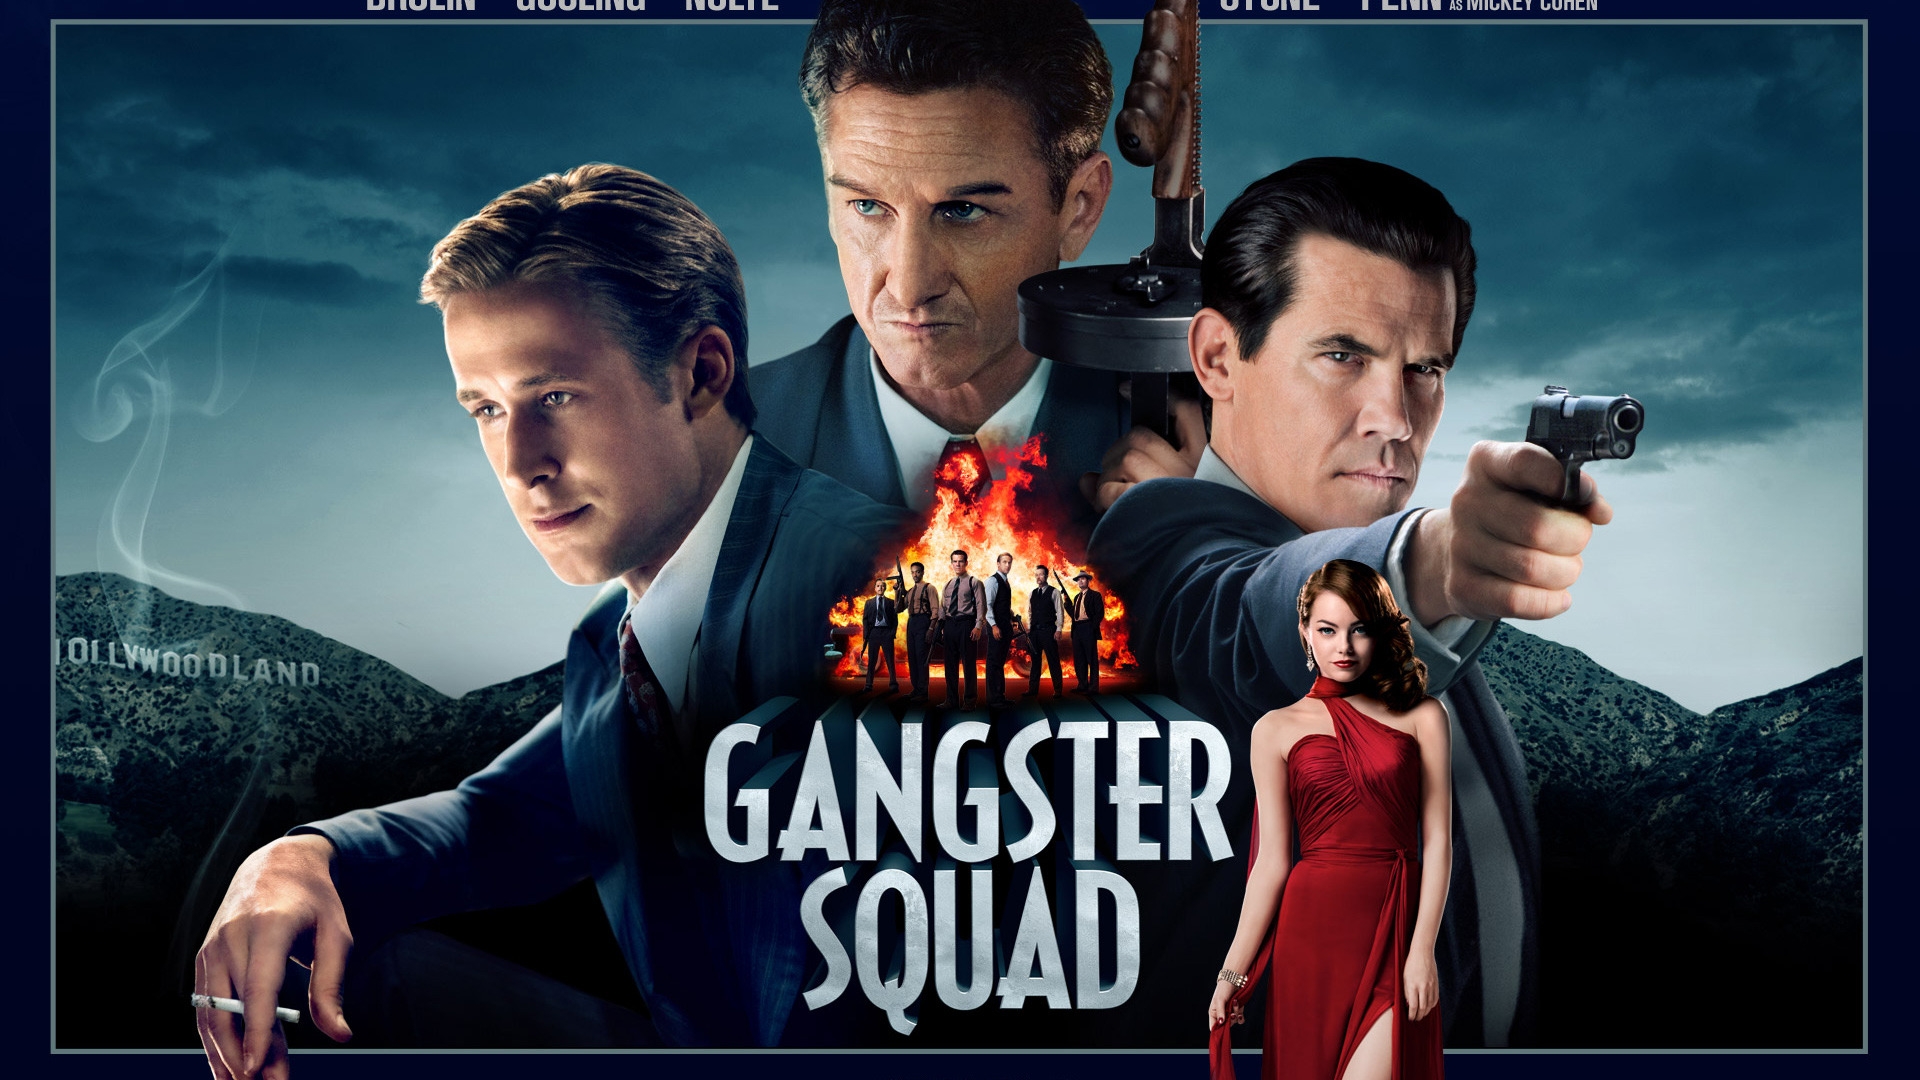 Gangster Squad Movie for 1920 x 1080 HDTV 1080p resolution